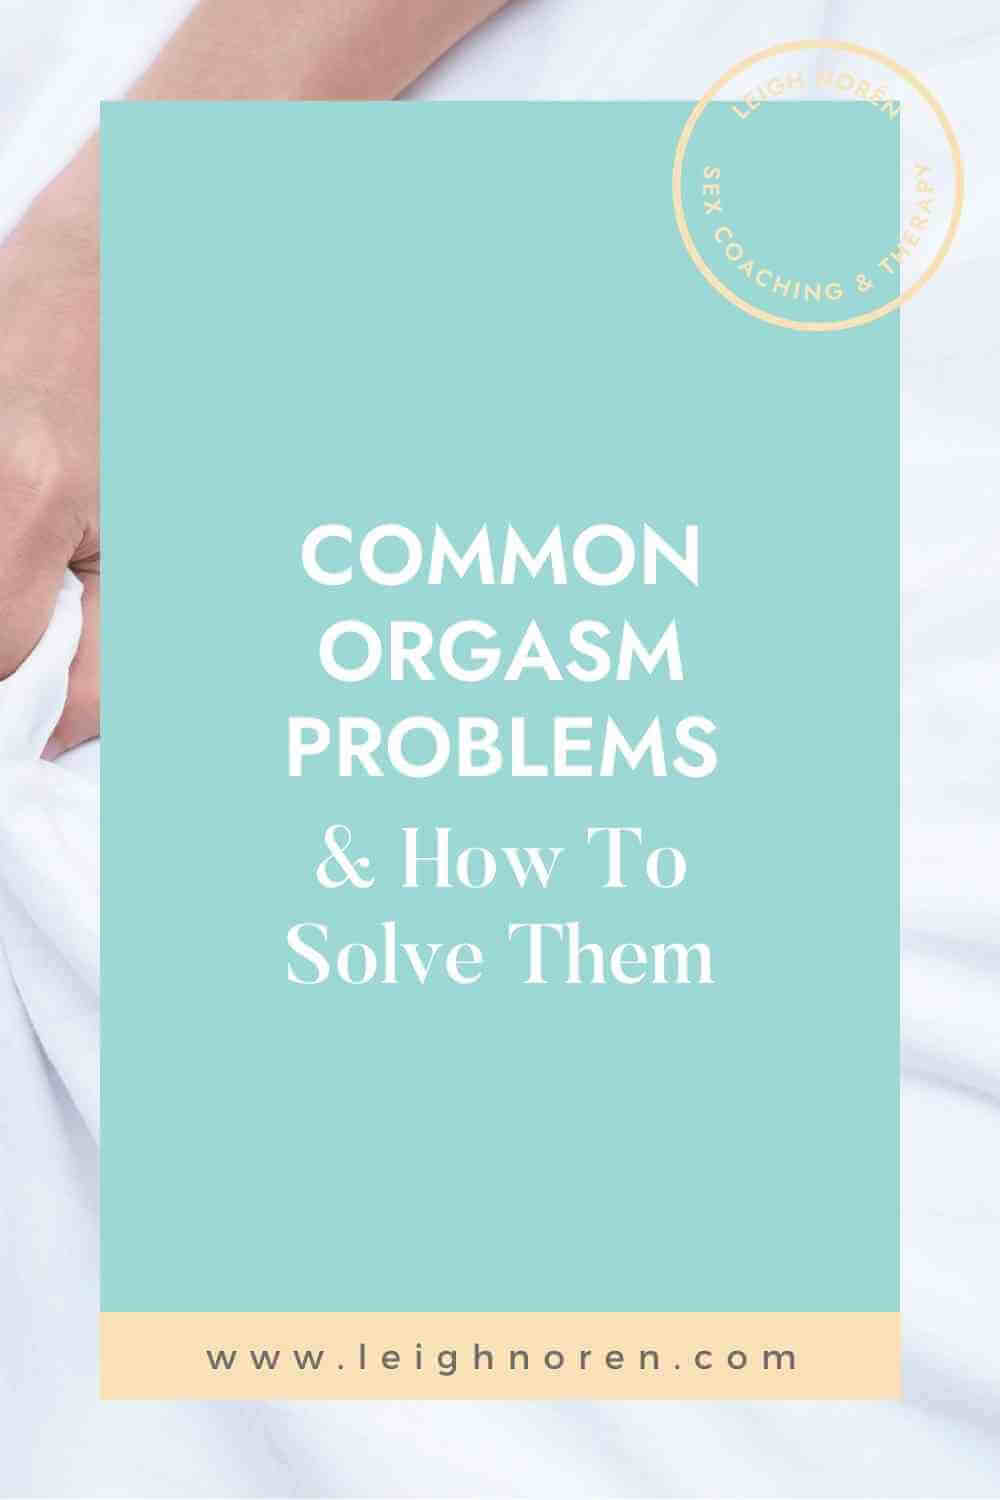 Common Orgasm Problems & How to Solve Them